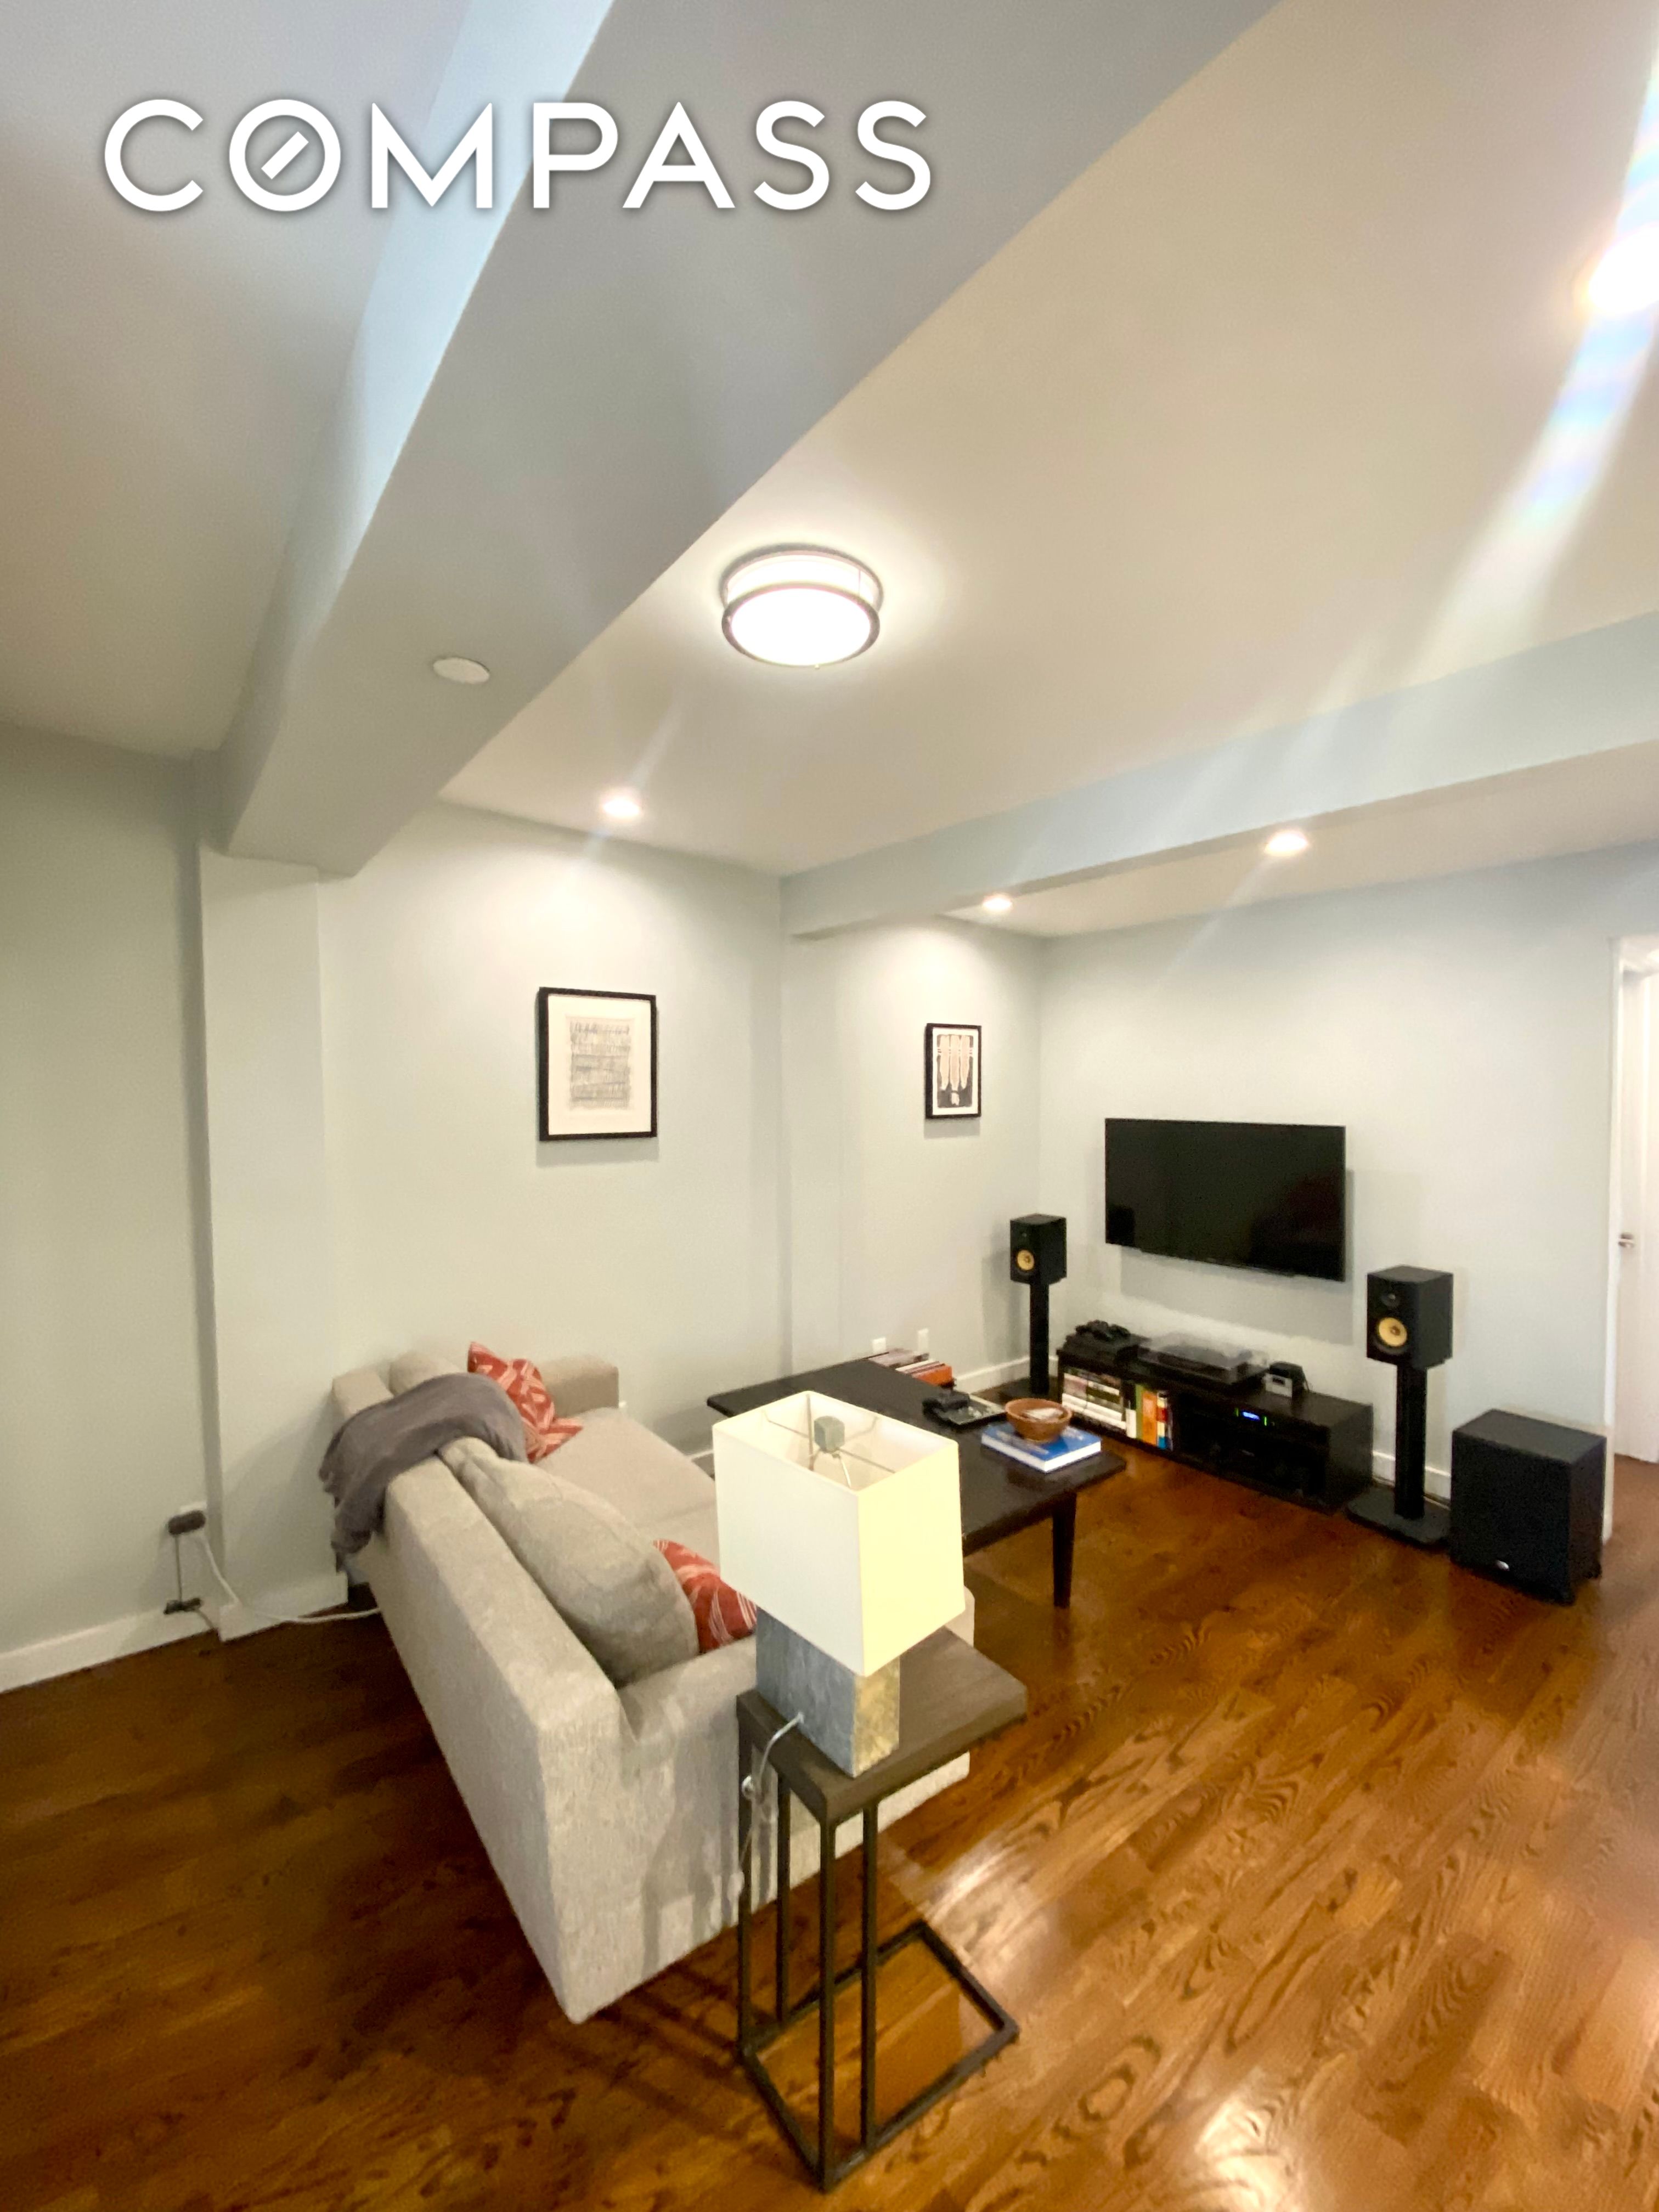 115 Ave C Ph, East Village, Downtown, NYC - 2 Bedrooms  
2 Bathrooms  
4 Rooms - 